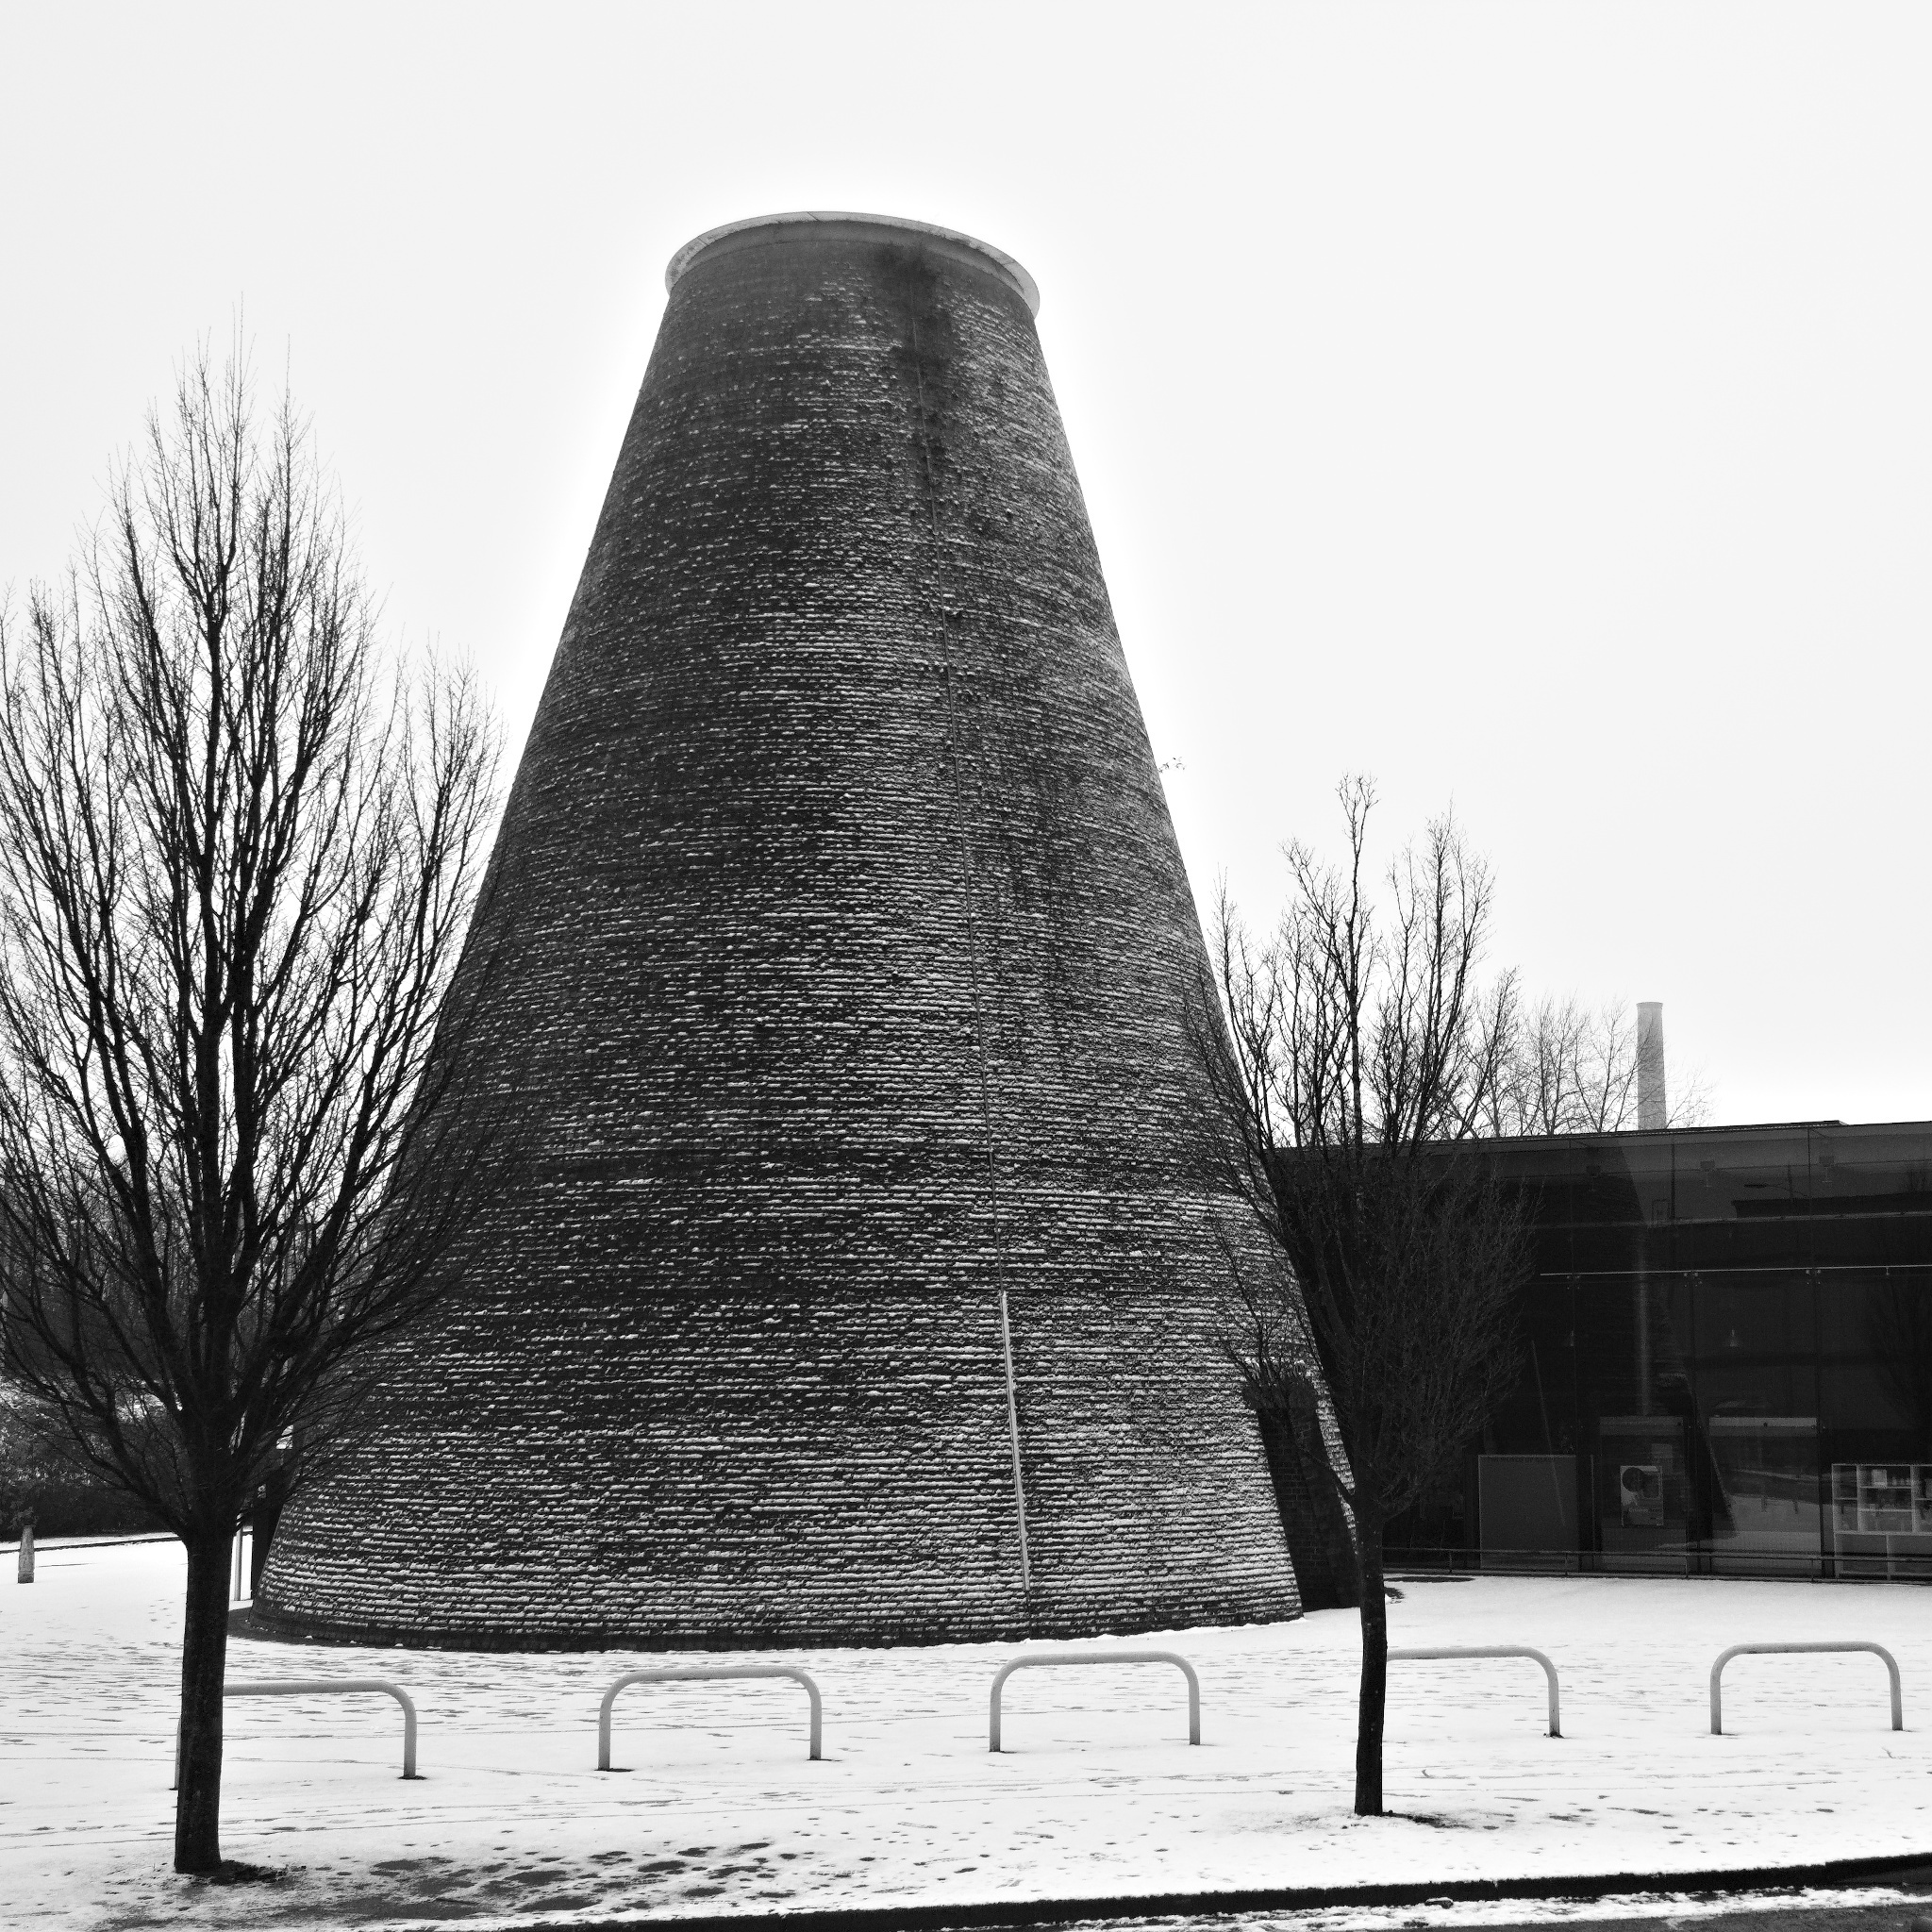 The entrance cone at the World of Glass, covered in snow